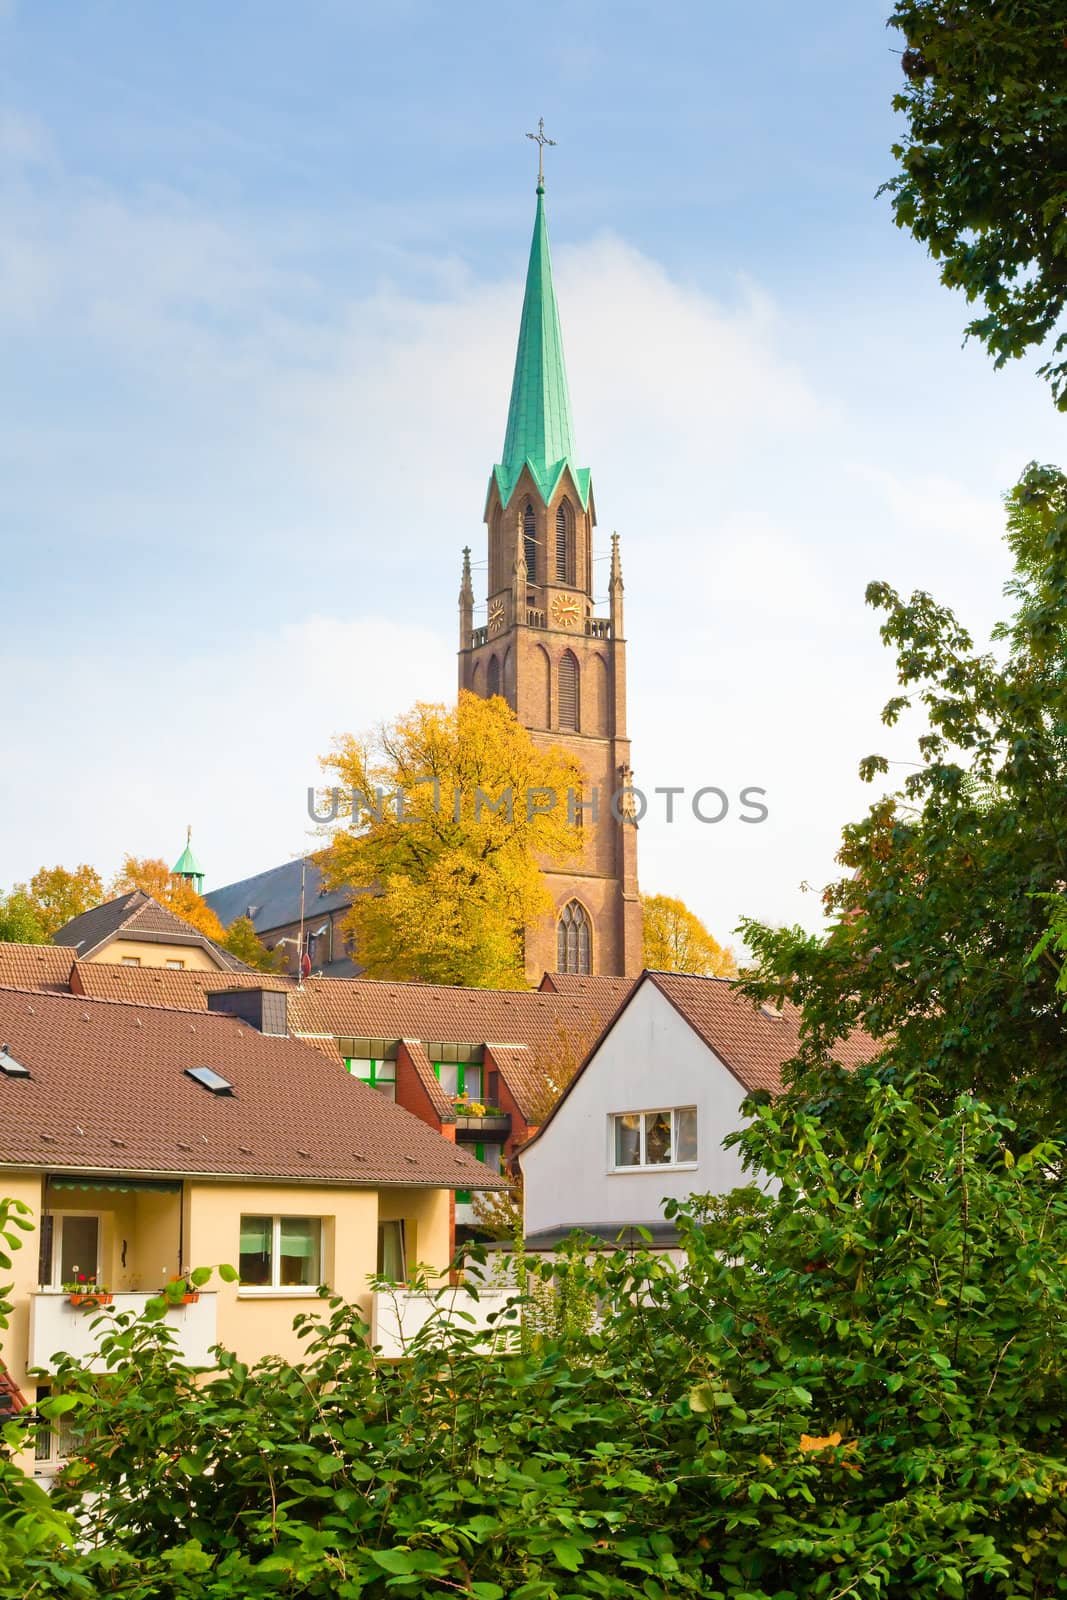 Brick church towering over houses, Essen-Borbeck, Germany.